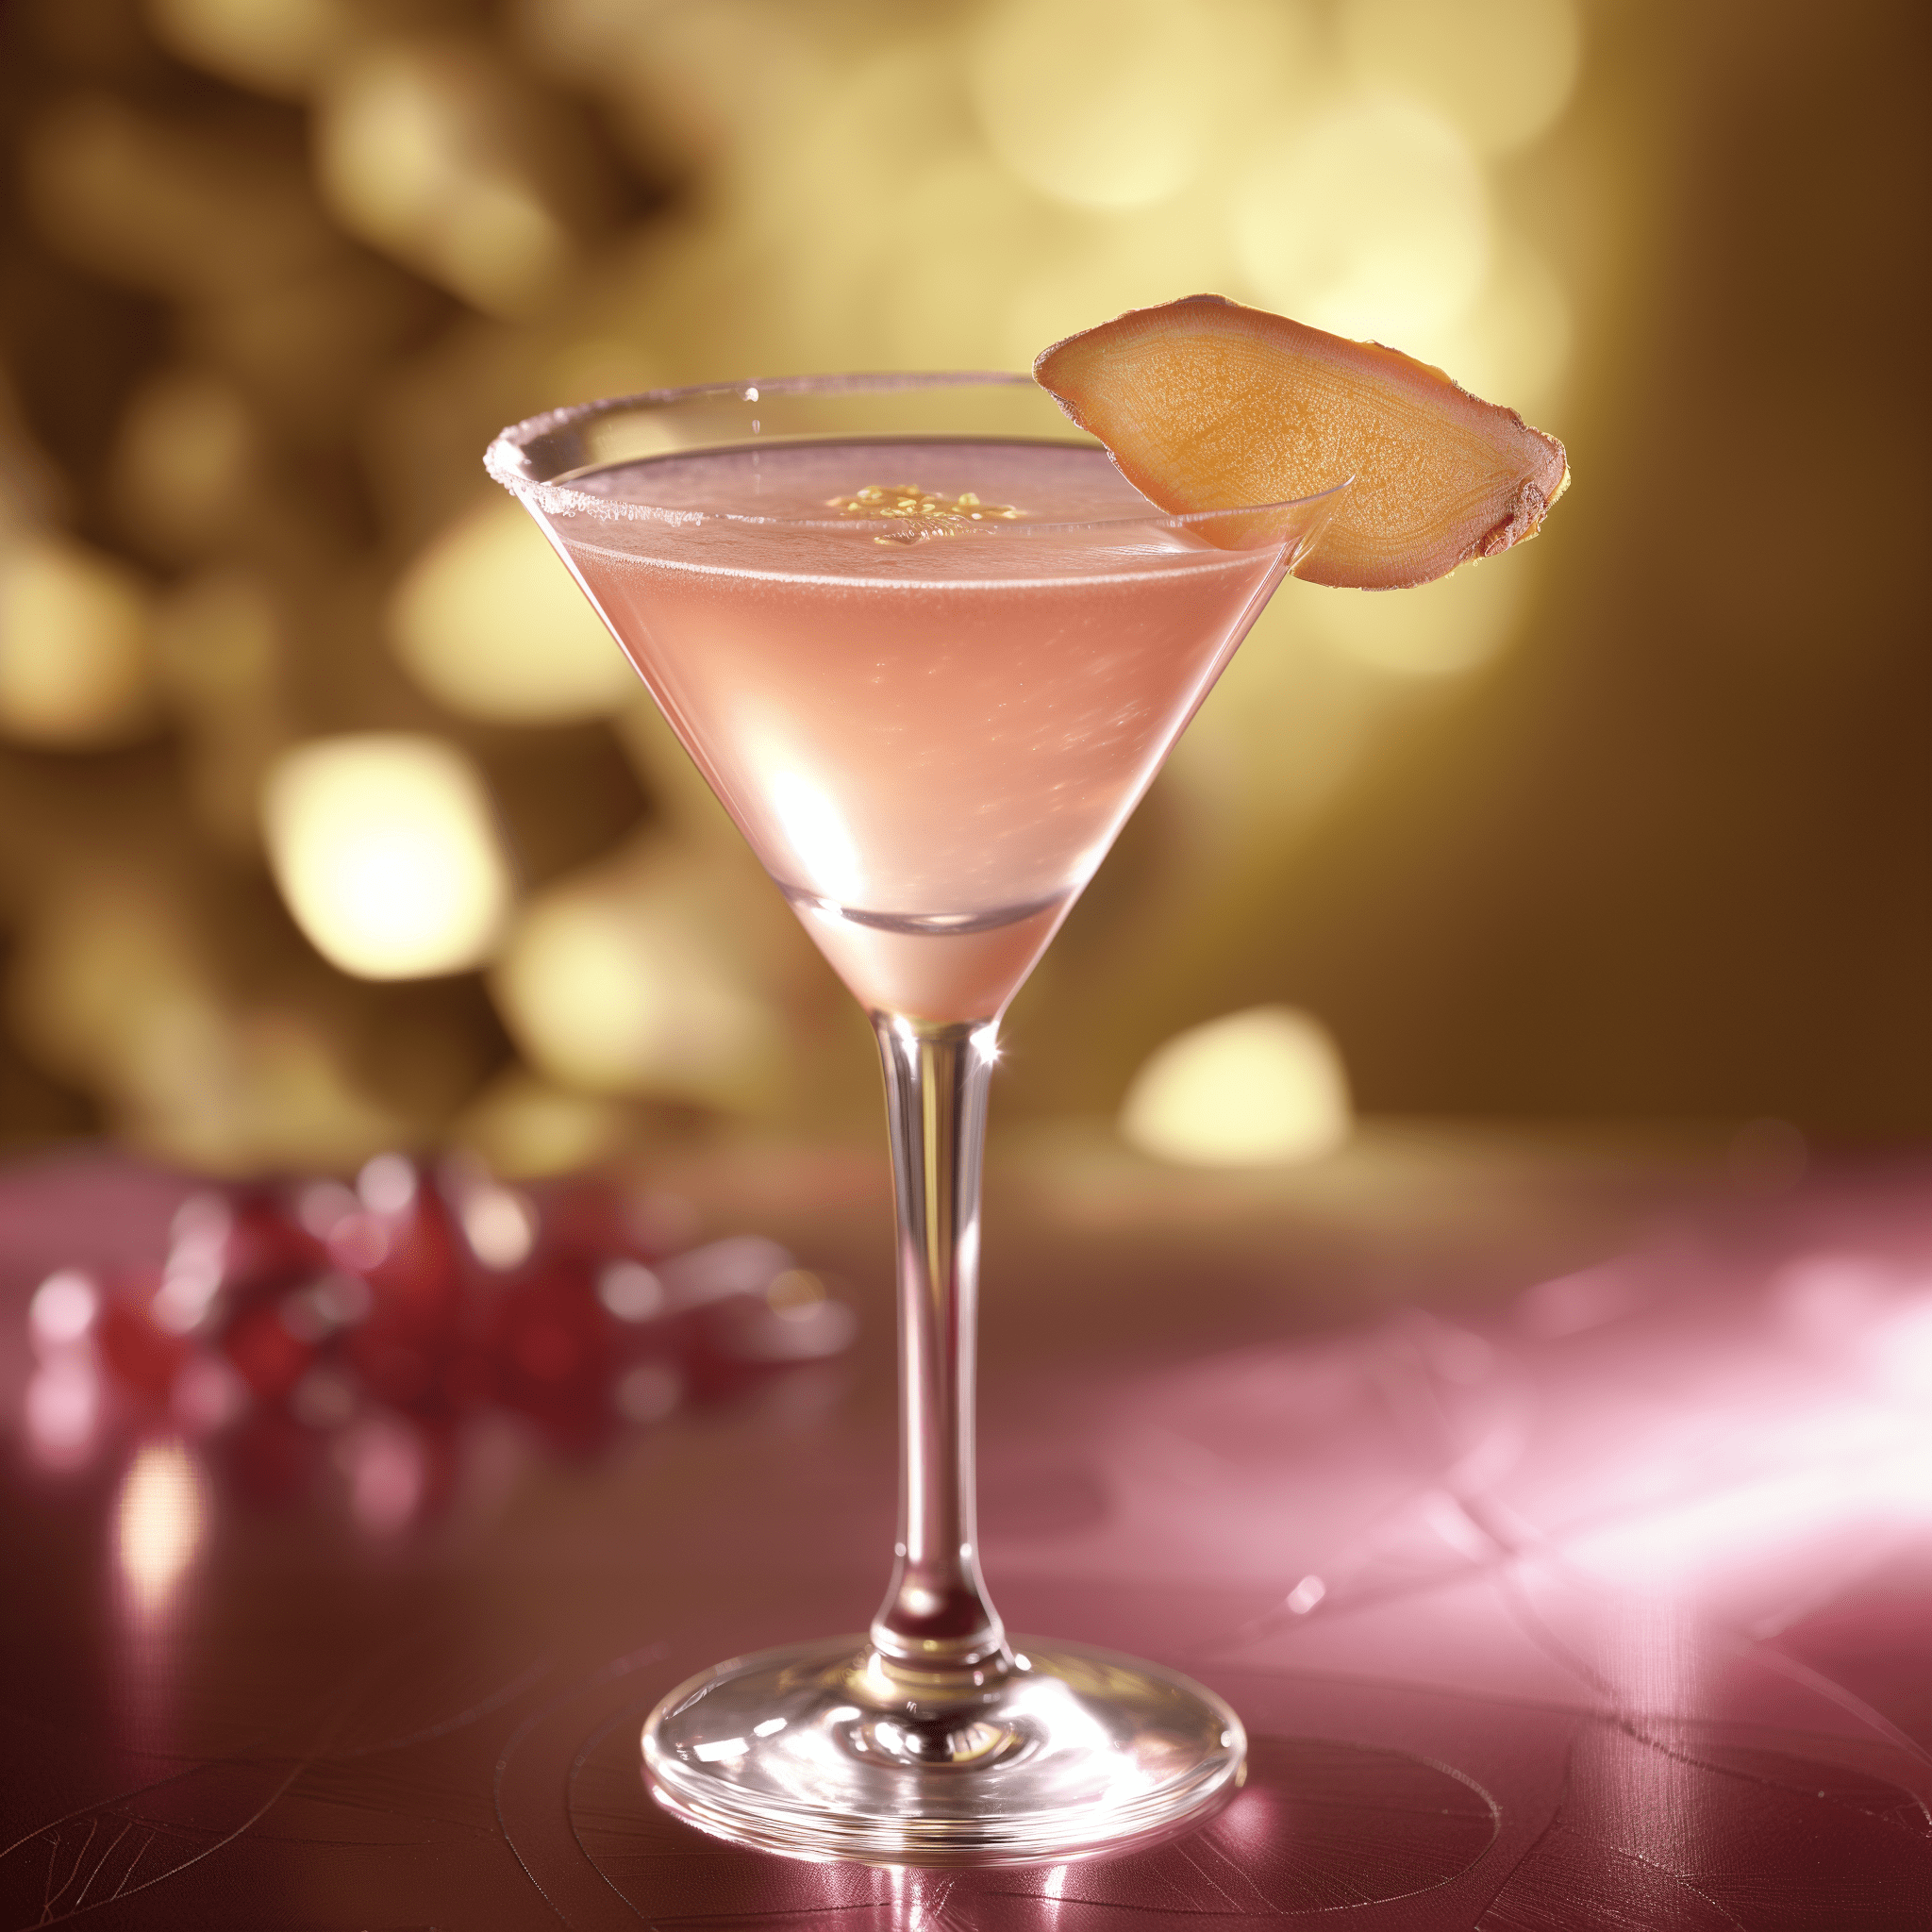 Ginger Cosmo Cocktail Recipe - The Ginger Cosmo offers a tantalizing combination of flavors. It's a vibrant mix that's both sweet and tart, with a refreshing citrus note and a warm, spicy undertone from the ginger. It's a bold drink that's not too strong, making it perfect for sipping.